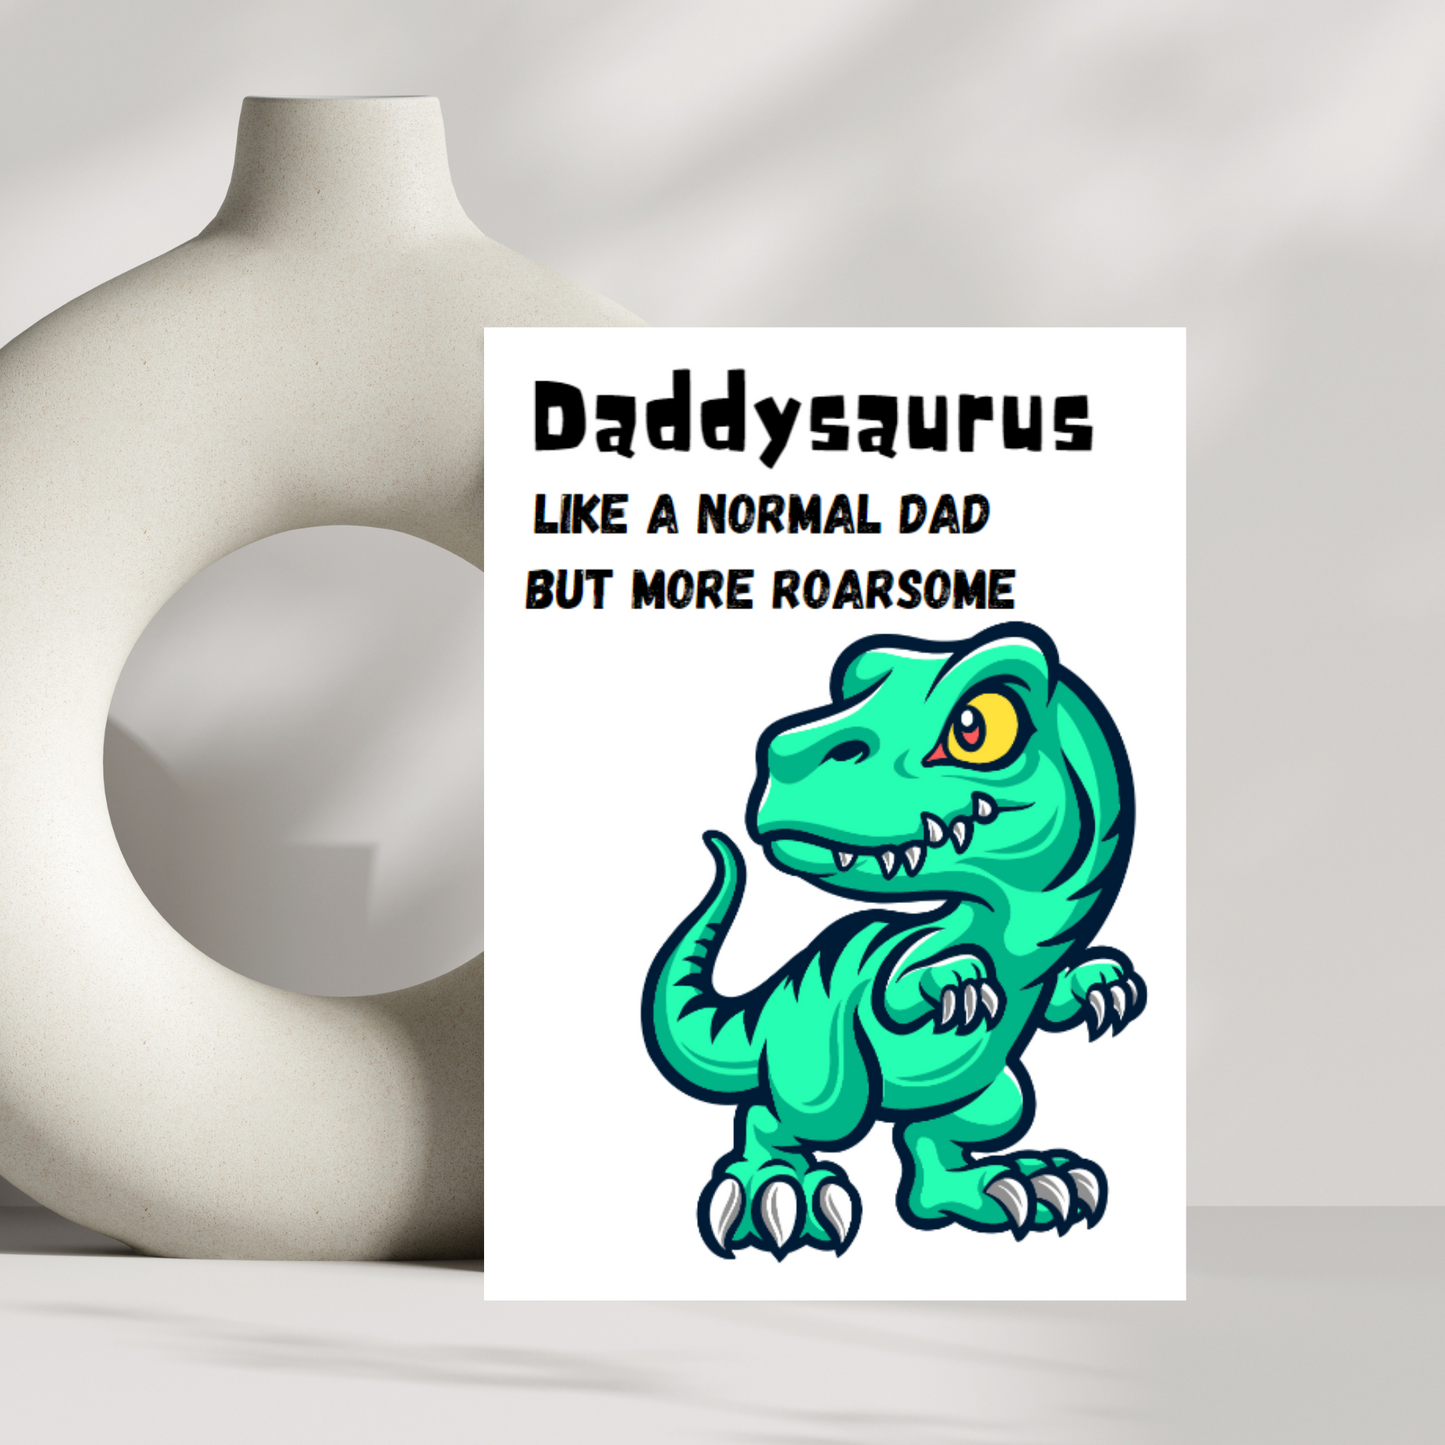 Daddysaurus, like a normal dad but more roarsome greetings card